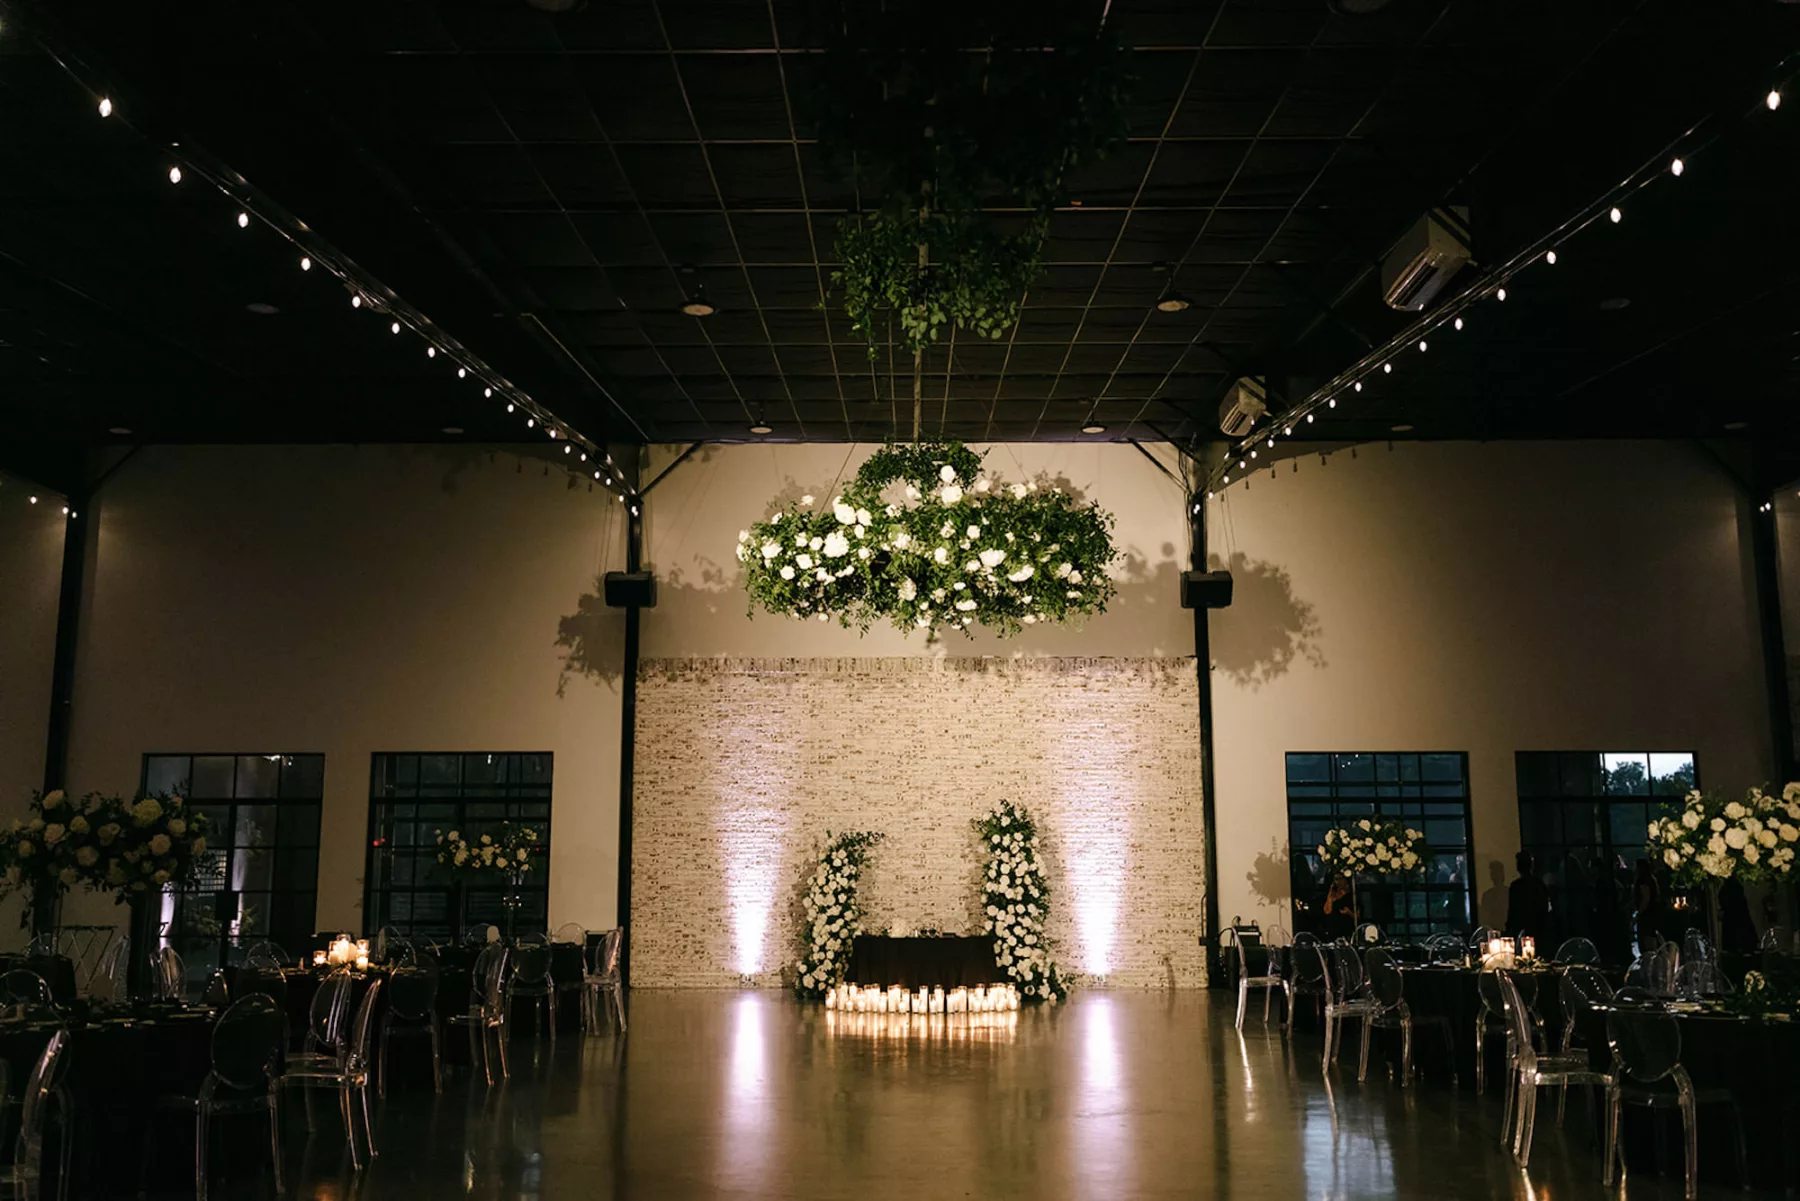 Moody Modern Black and White Wedding Reception Sweetheart Table Candlelight Decor Inspiration | White Rose, Hydrangeas, and Greenery Floral Chandelier Ideas | Tampa Bay Florist Bloom Shakalaka | Event Planner Kelci Leigh Events | Venue White Rock Canyon